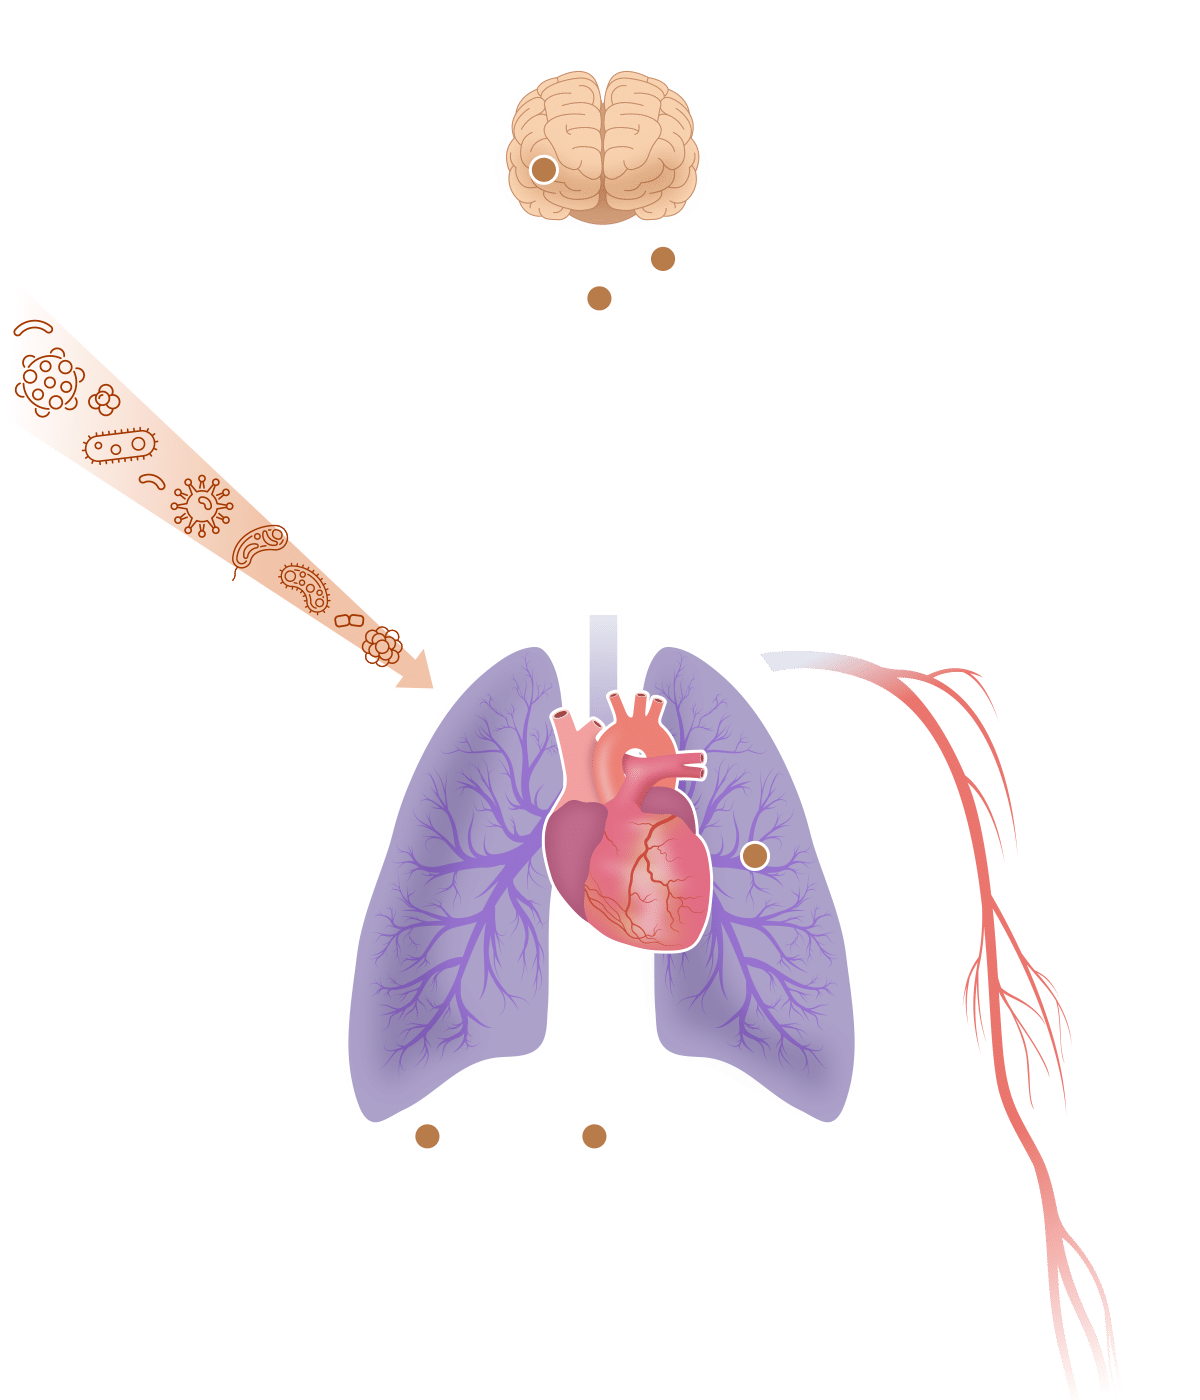 How Covid Affects the Body interactive graphic - Normal organs